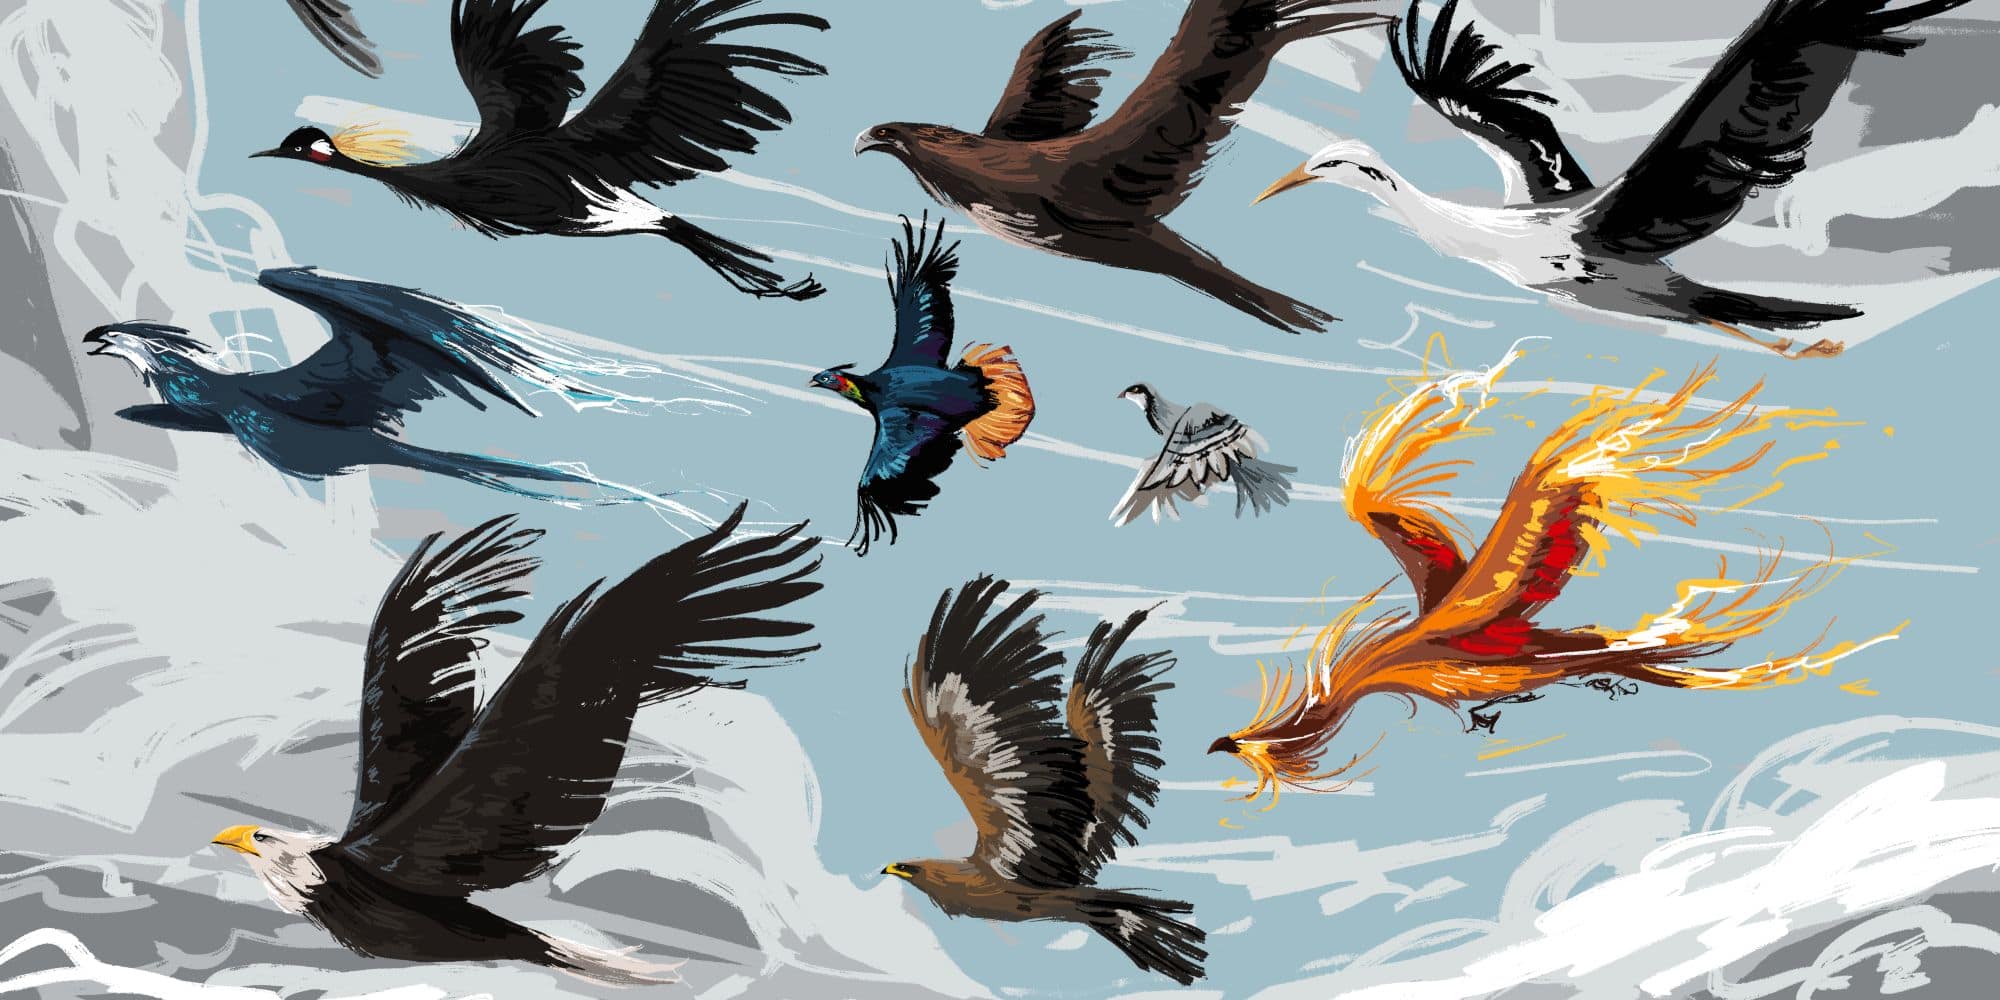 Artwork of birds flying in the sky by student and artist Bella Memeo